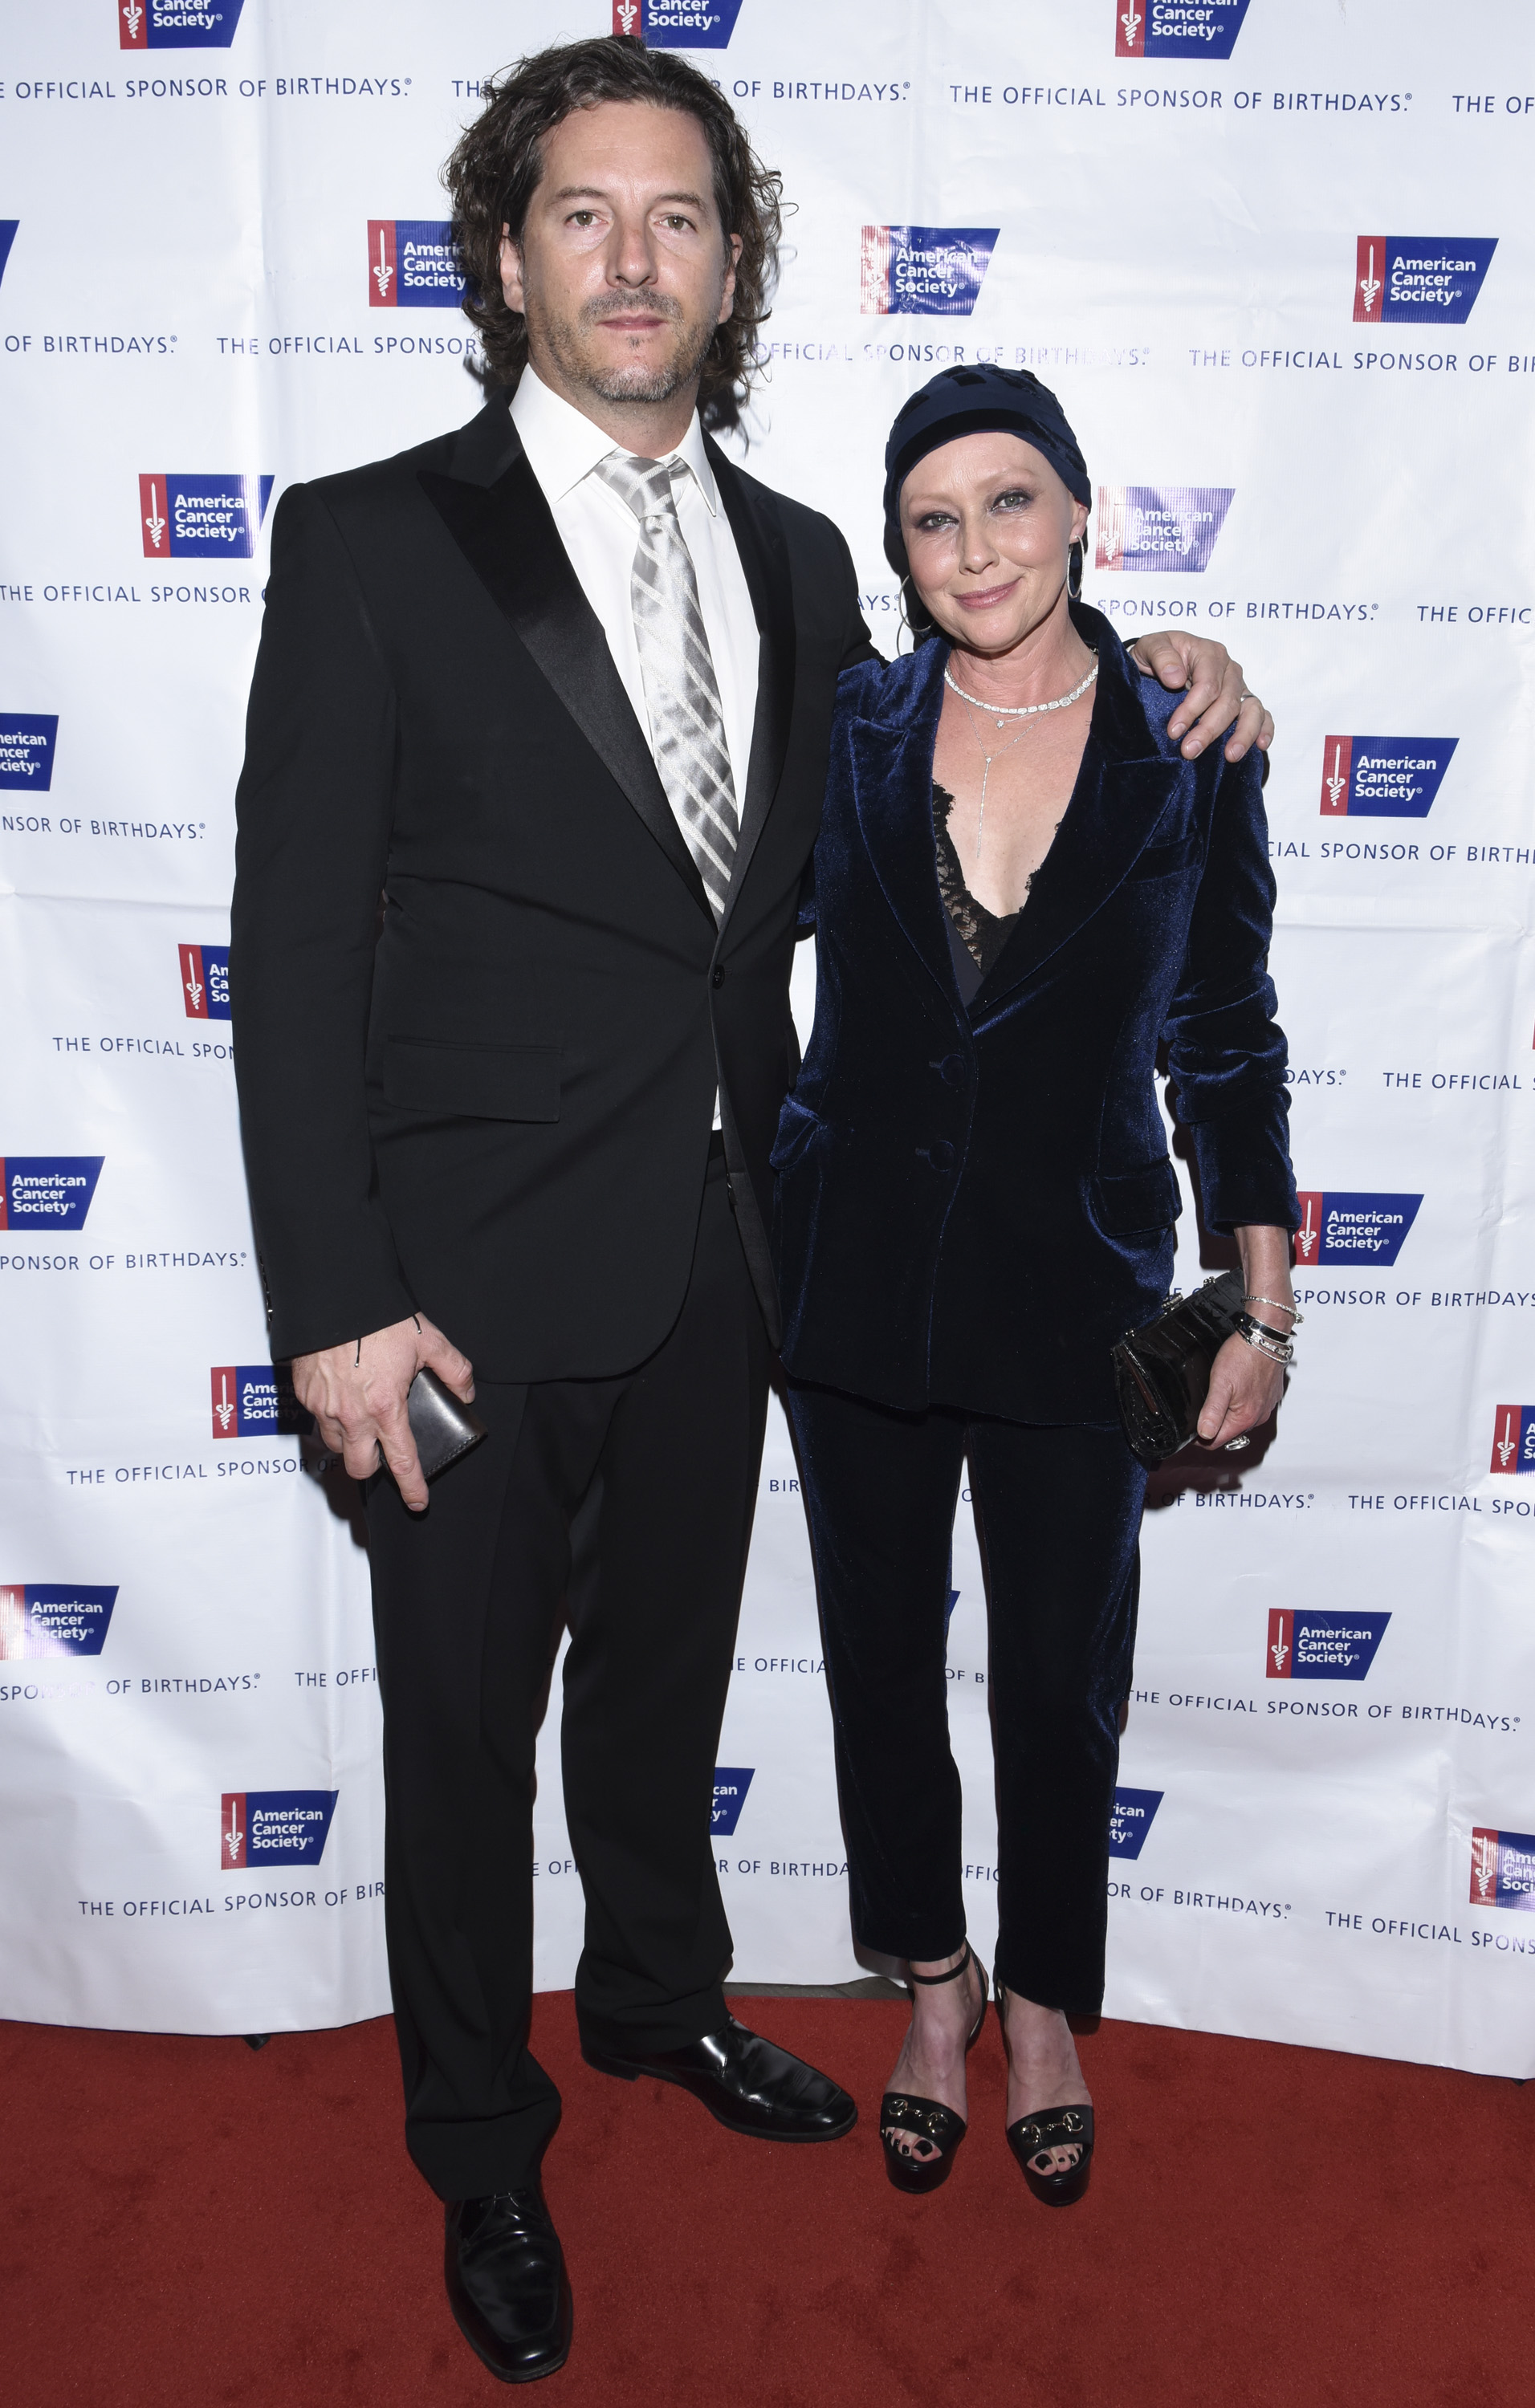 Their divorce was bitter and Shannen Doherty was able to block her ex from profiting off her image in the divorce - though that could be declared invalid